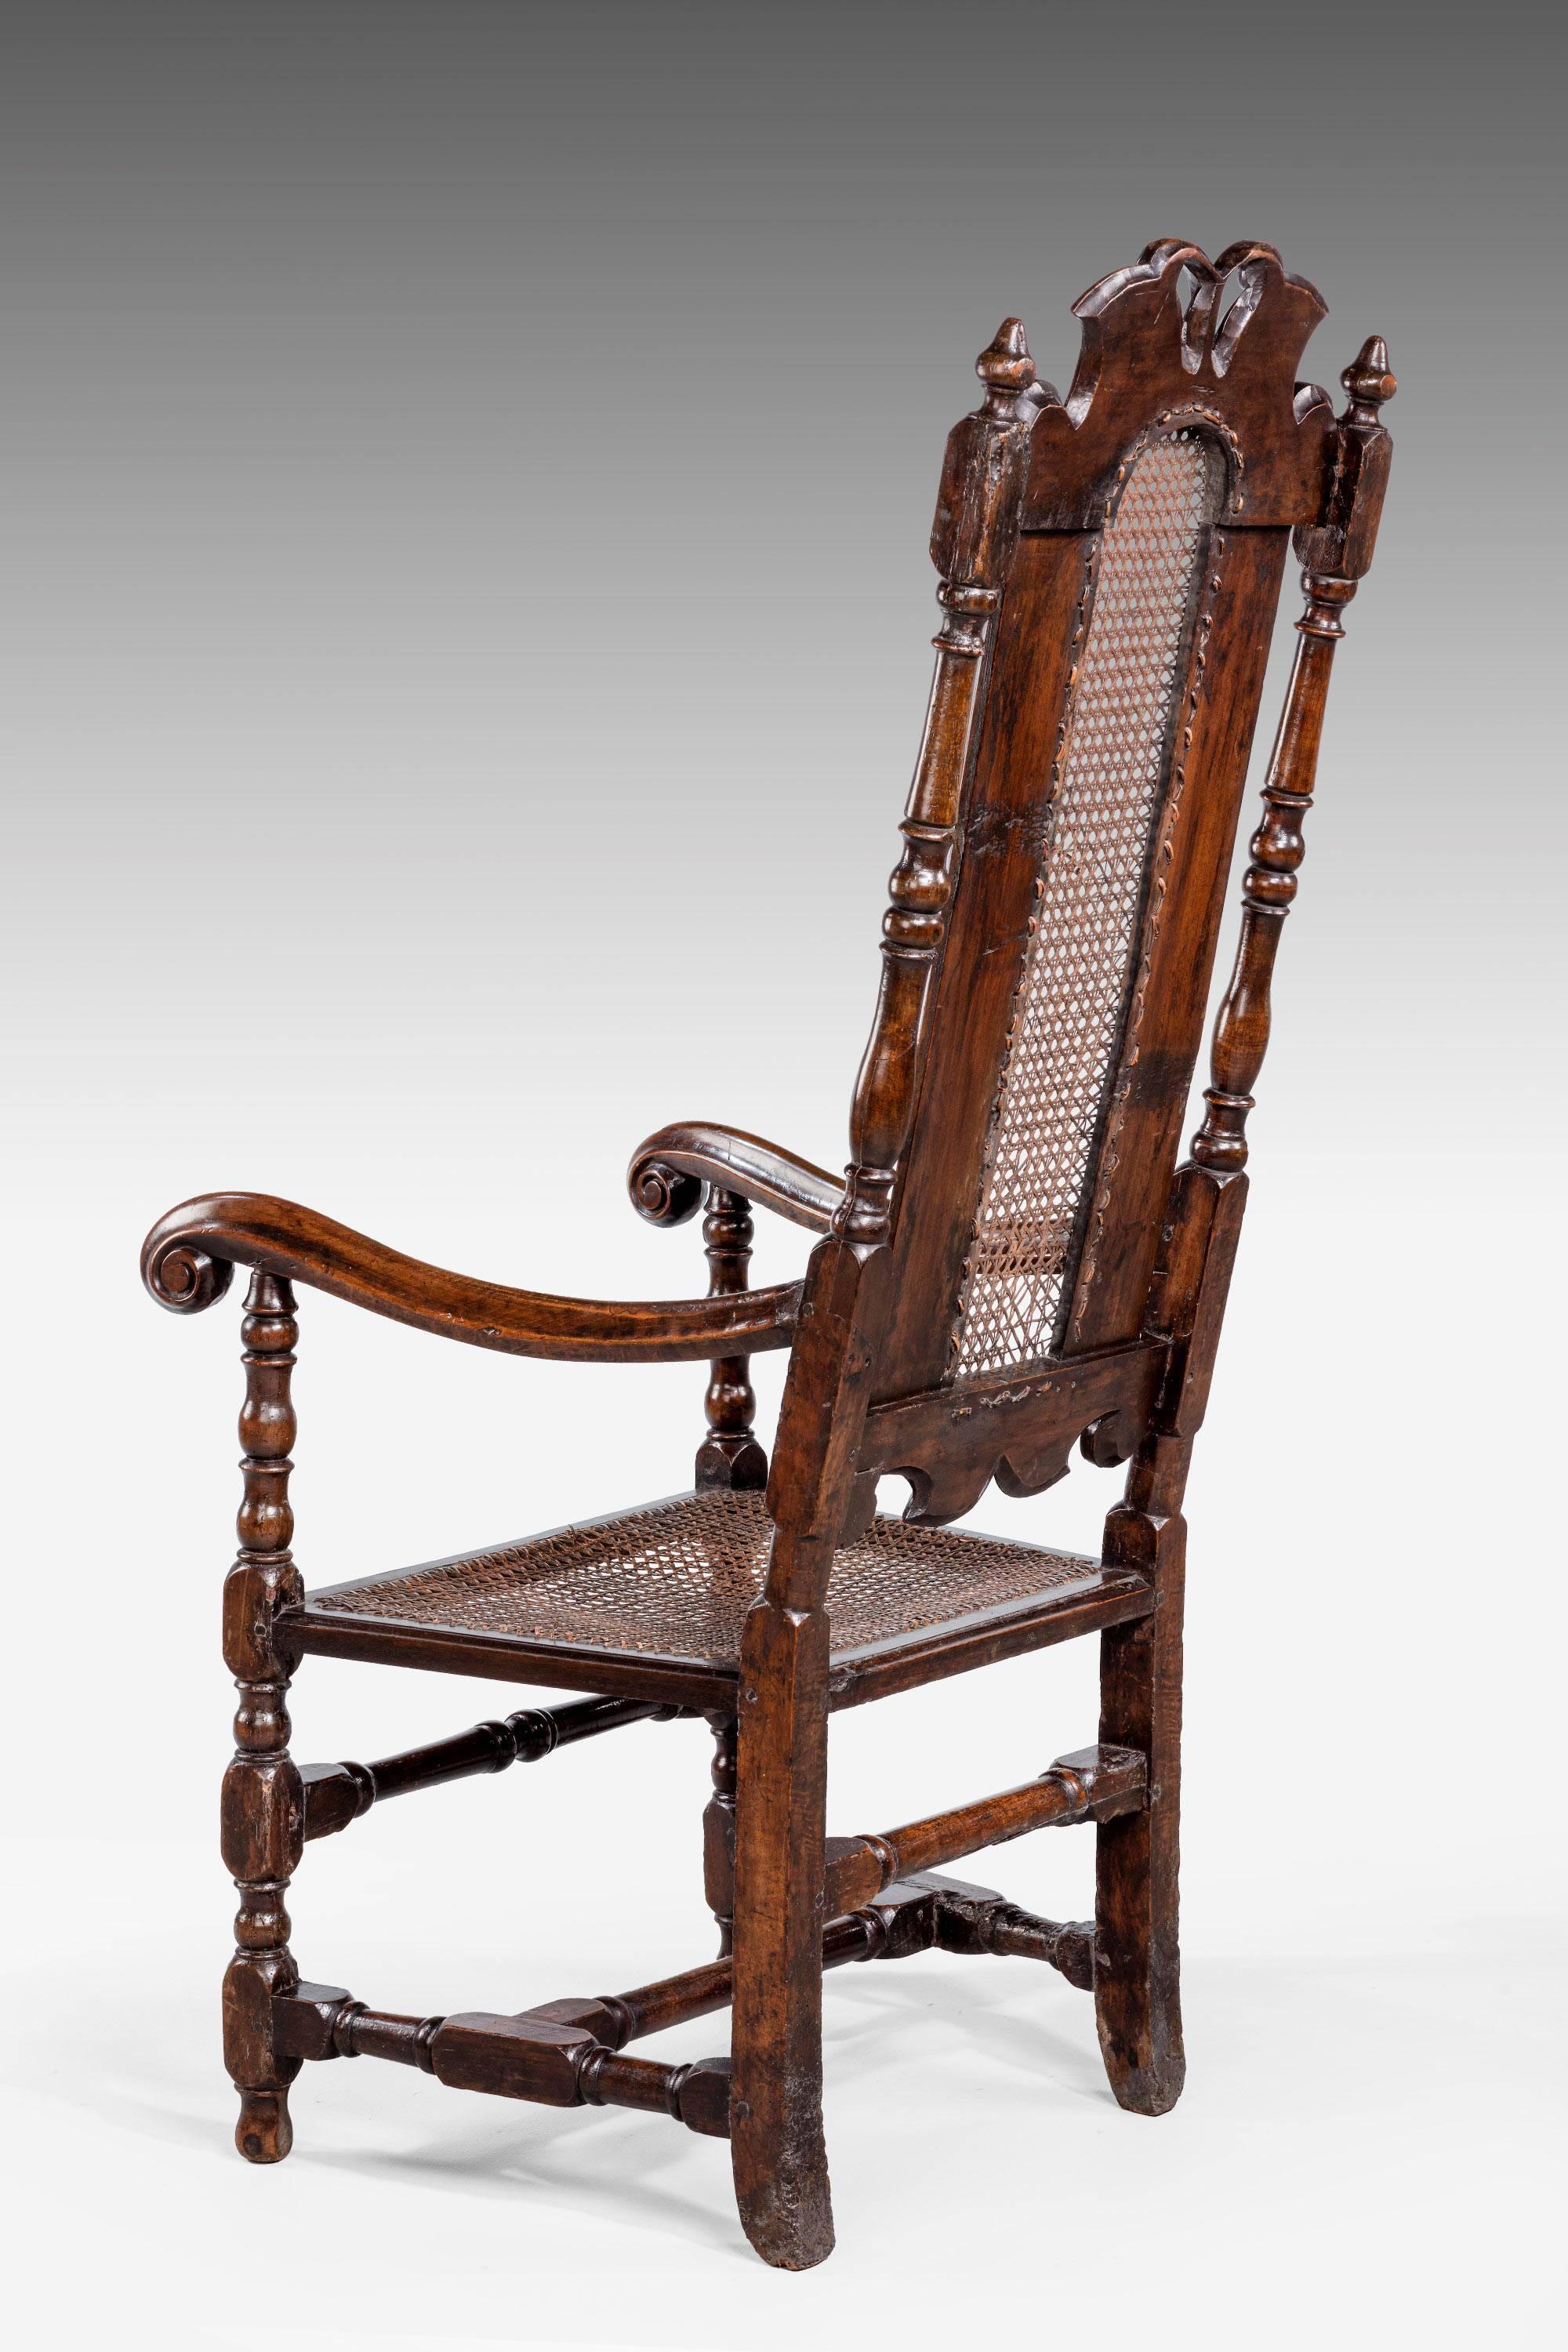 17th century chairs for sale